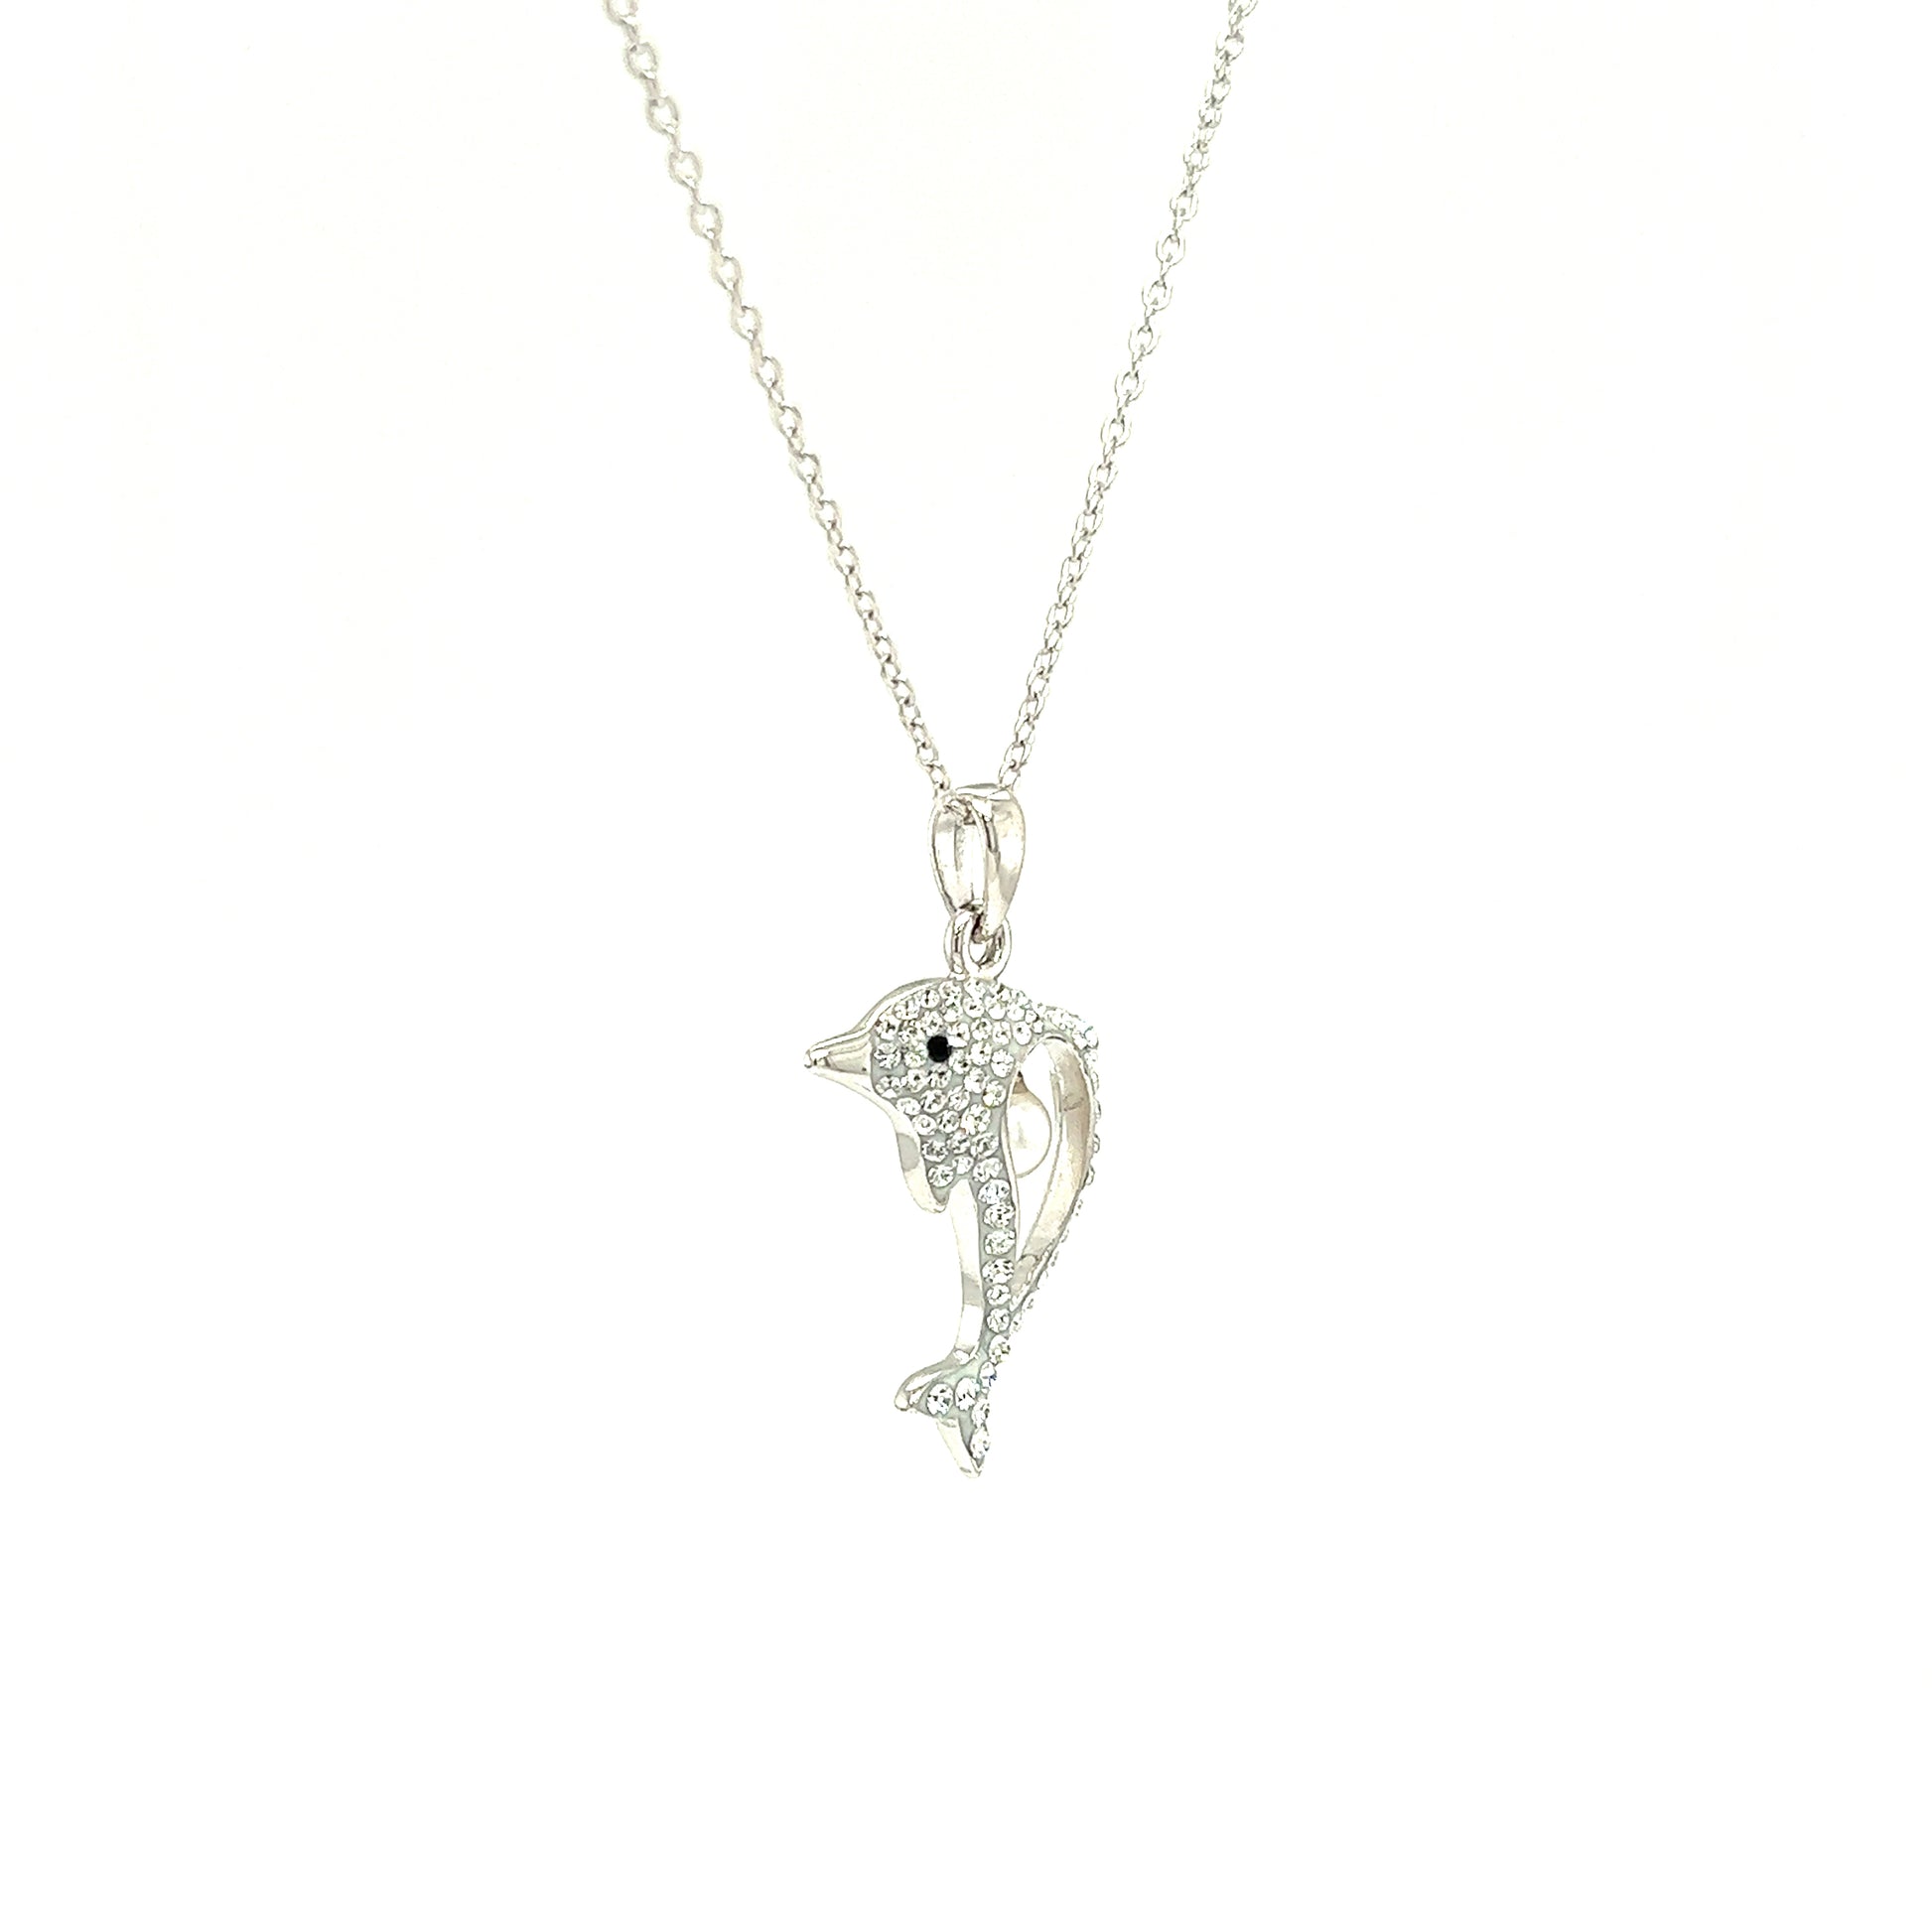 Dolphin Necklace With 4mm White Pearl and White Crystals in Sterling Silver Right Side View